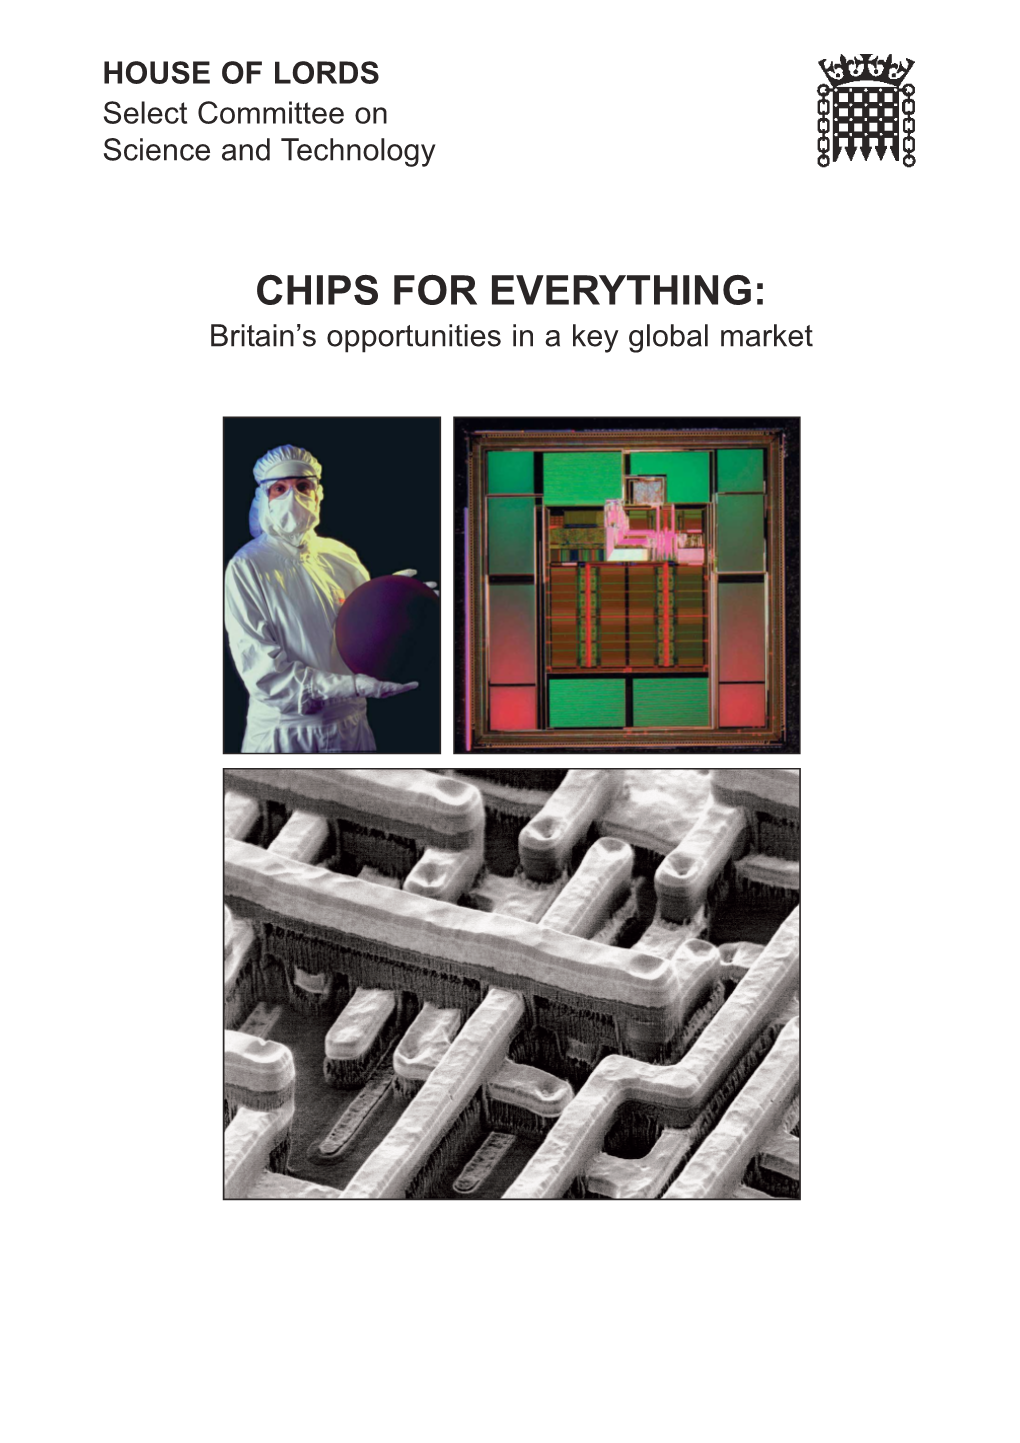 CHIPS for EVERYTHING: Britain’S Opportunities in a Key Global Market FRONT COVER (See Paragraphs 4.5 and 4.6)